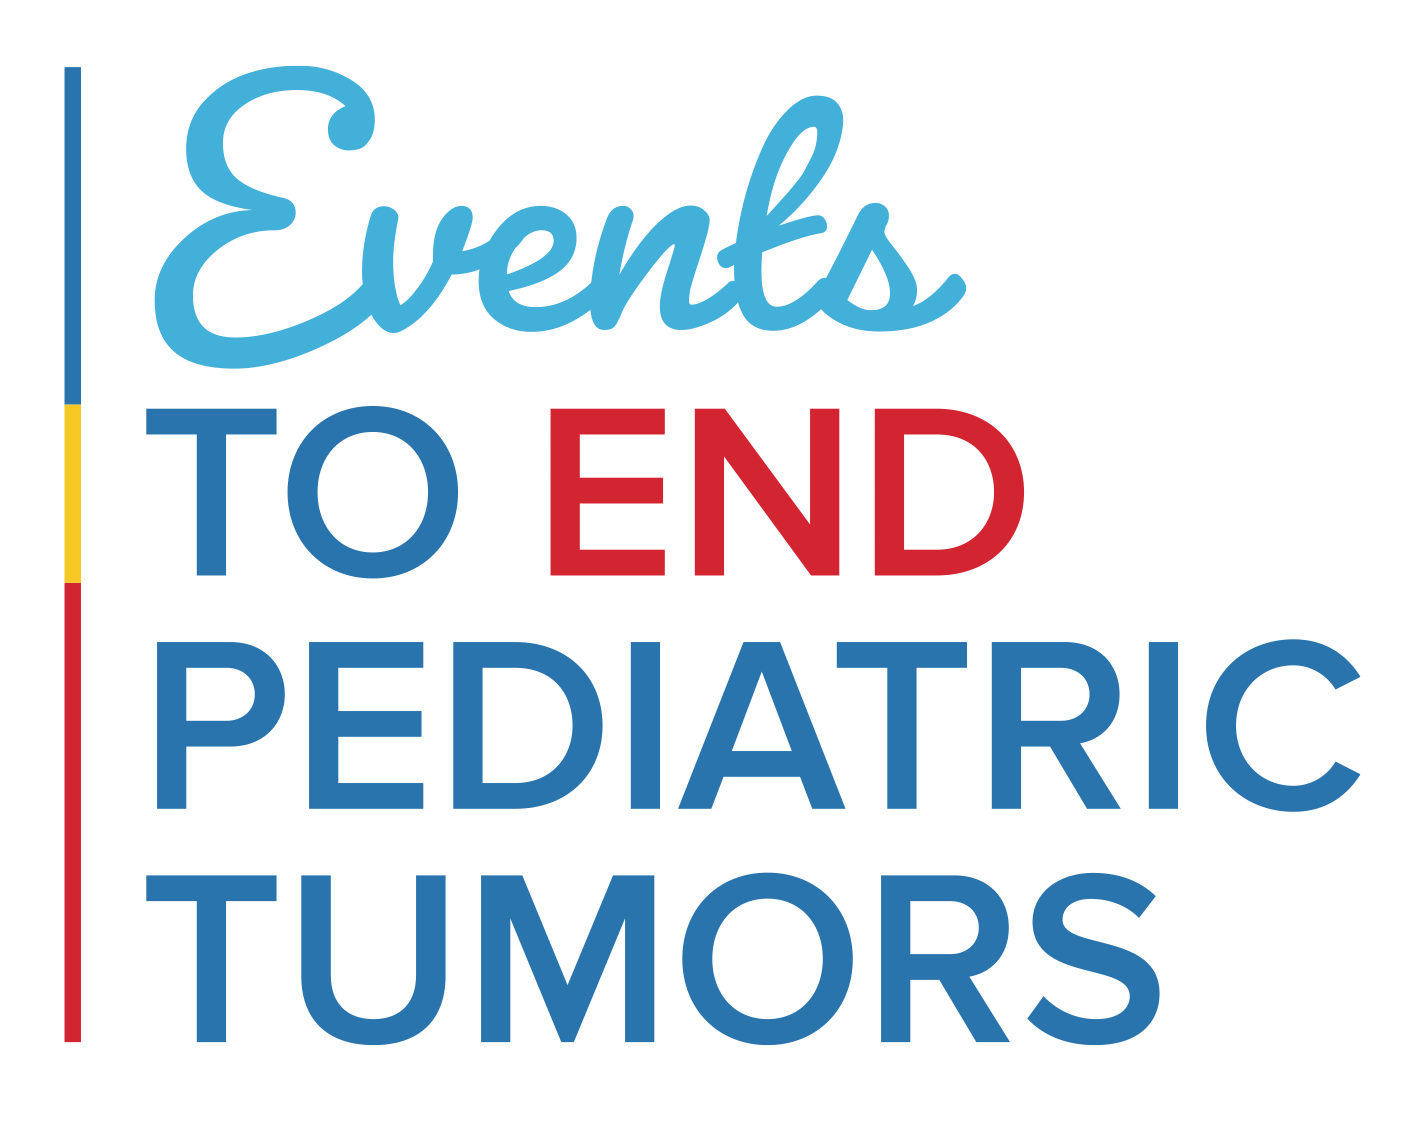 Events To End Pediatric Tumors